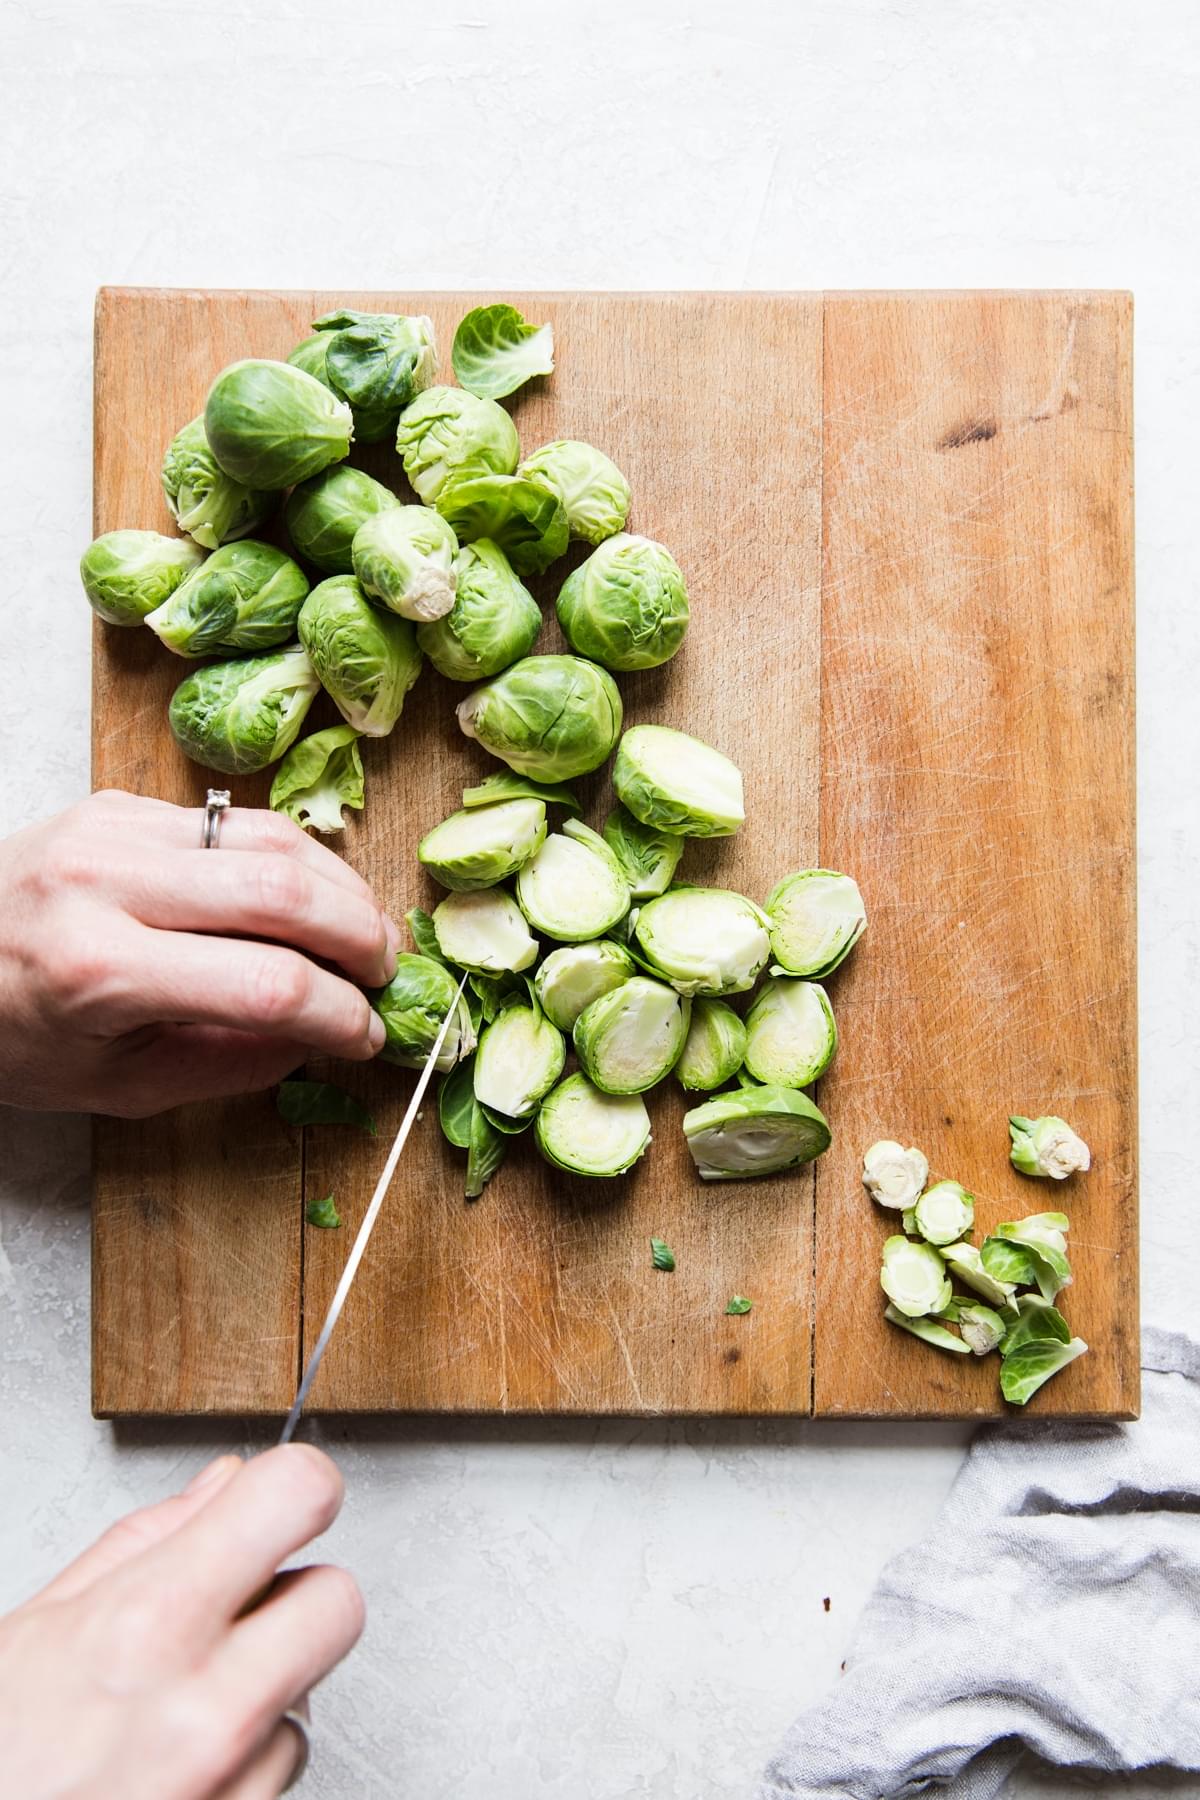 hands slicing brussels sprouts on a cutting board with a knife